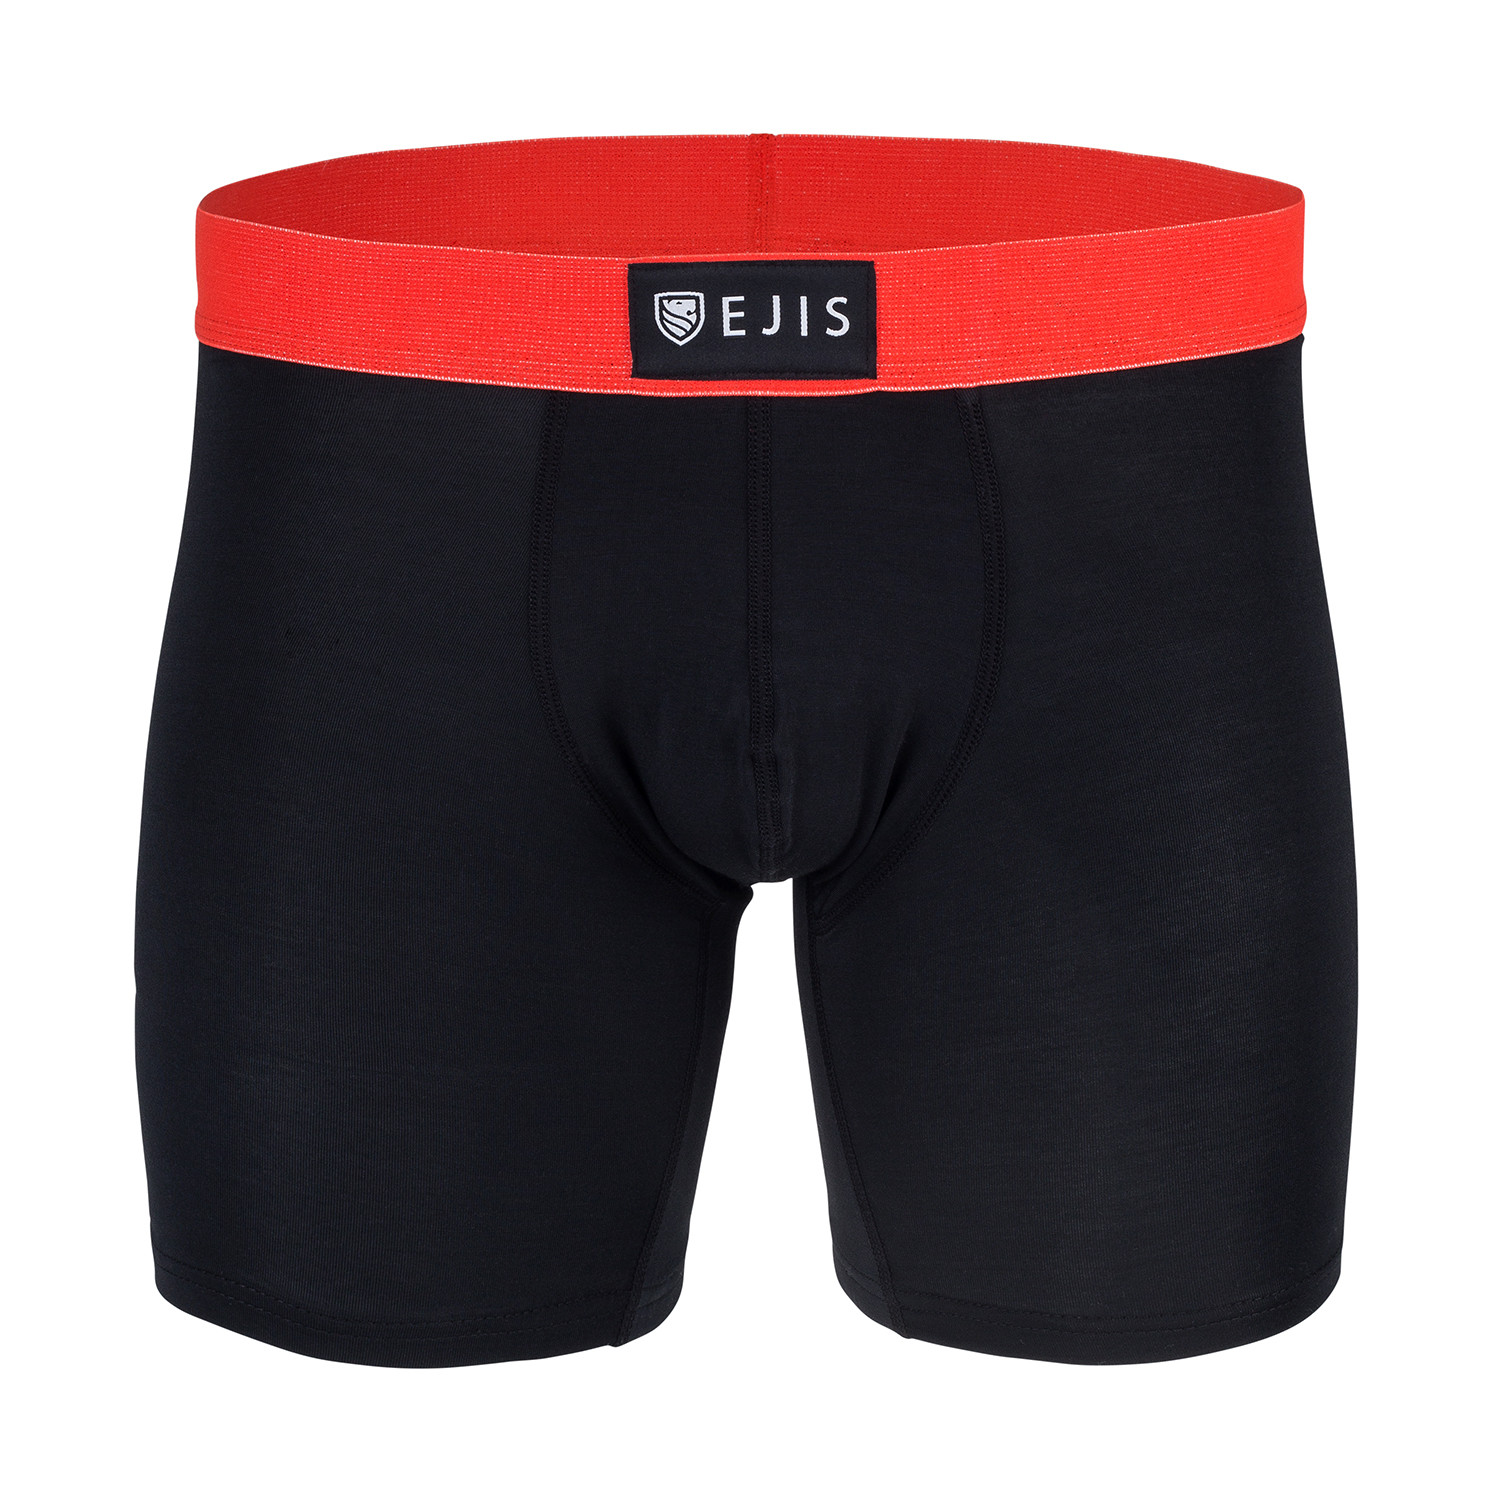 The Ejis Sweat Proof Boxer Briefs have built in sweat protection